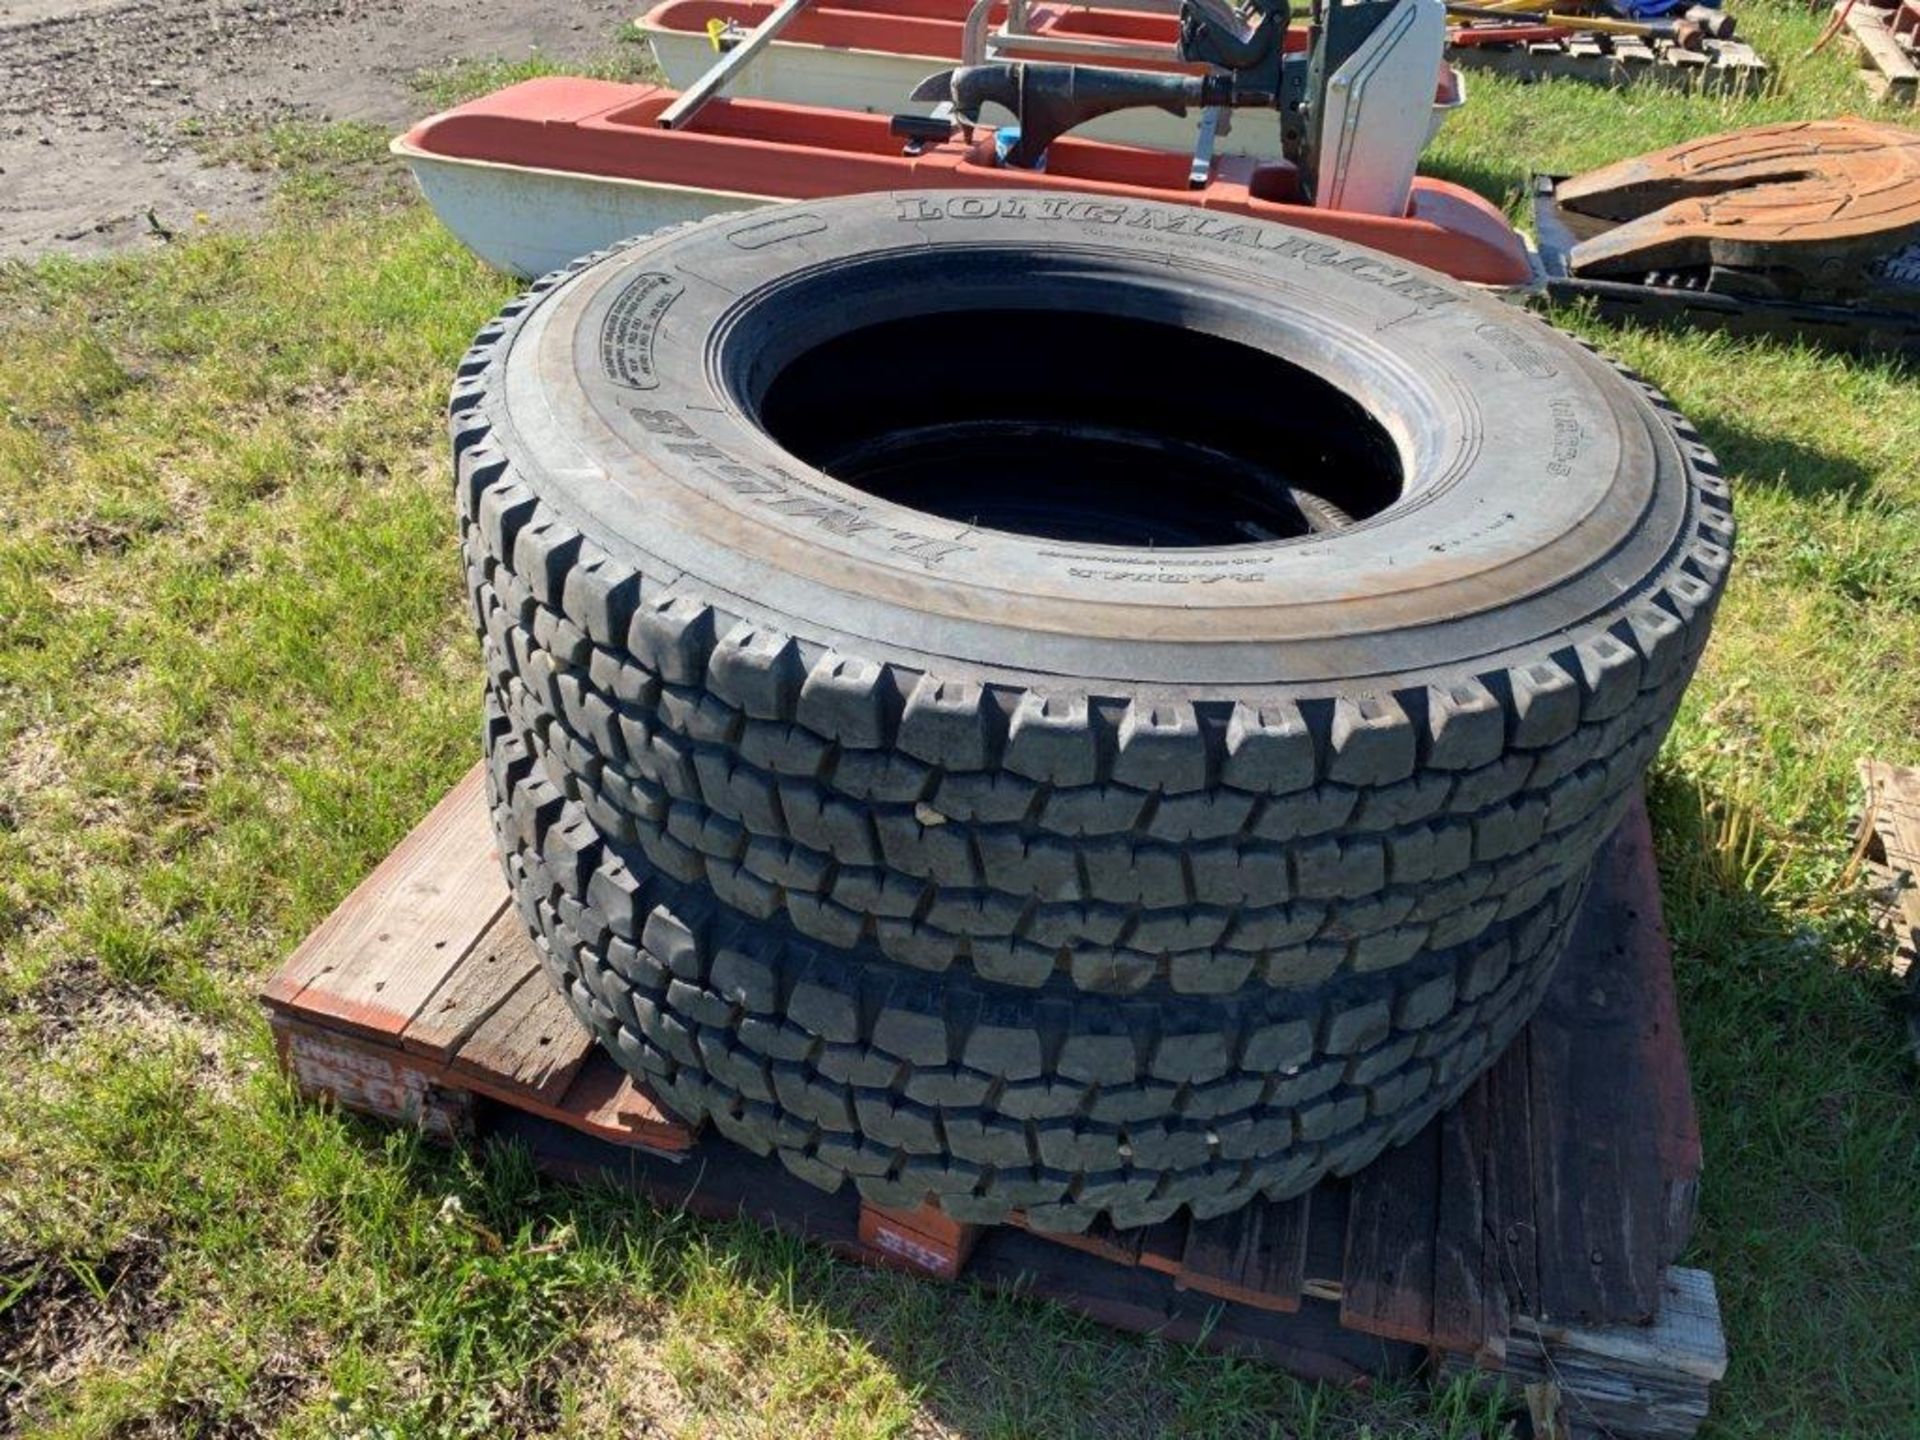 2-LONG MARCH LARGE TRUCK TIRES LM518 11R 22.5